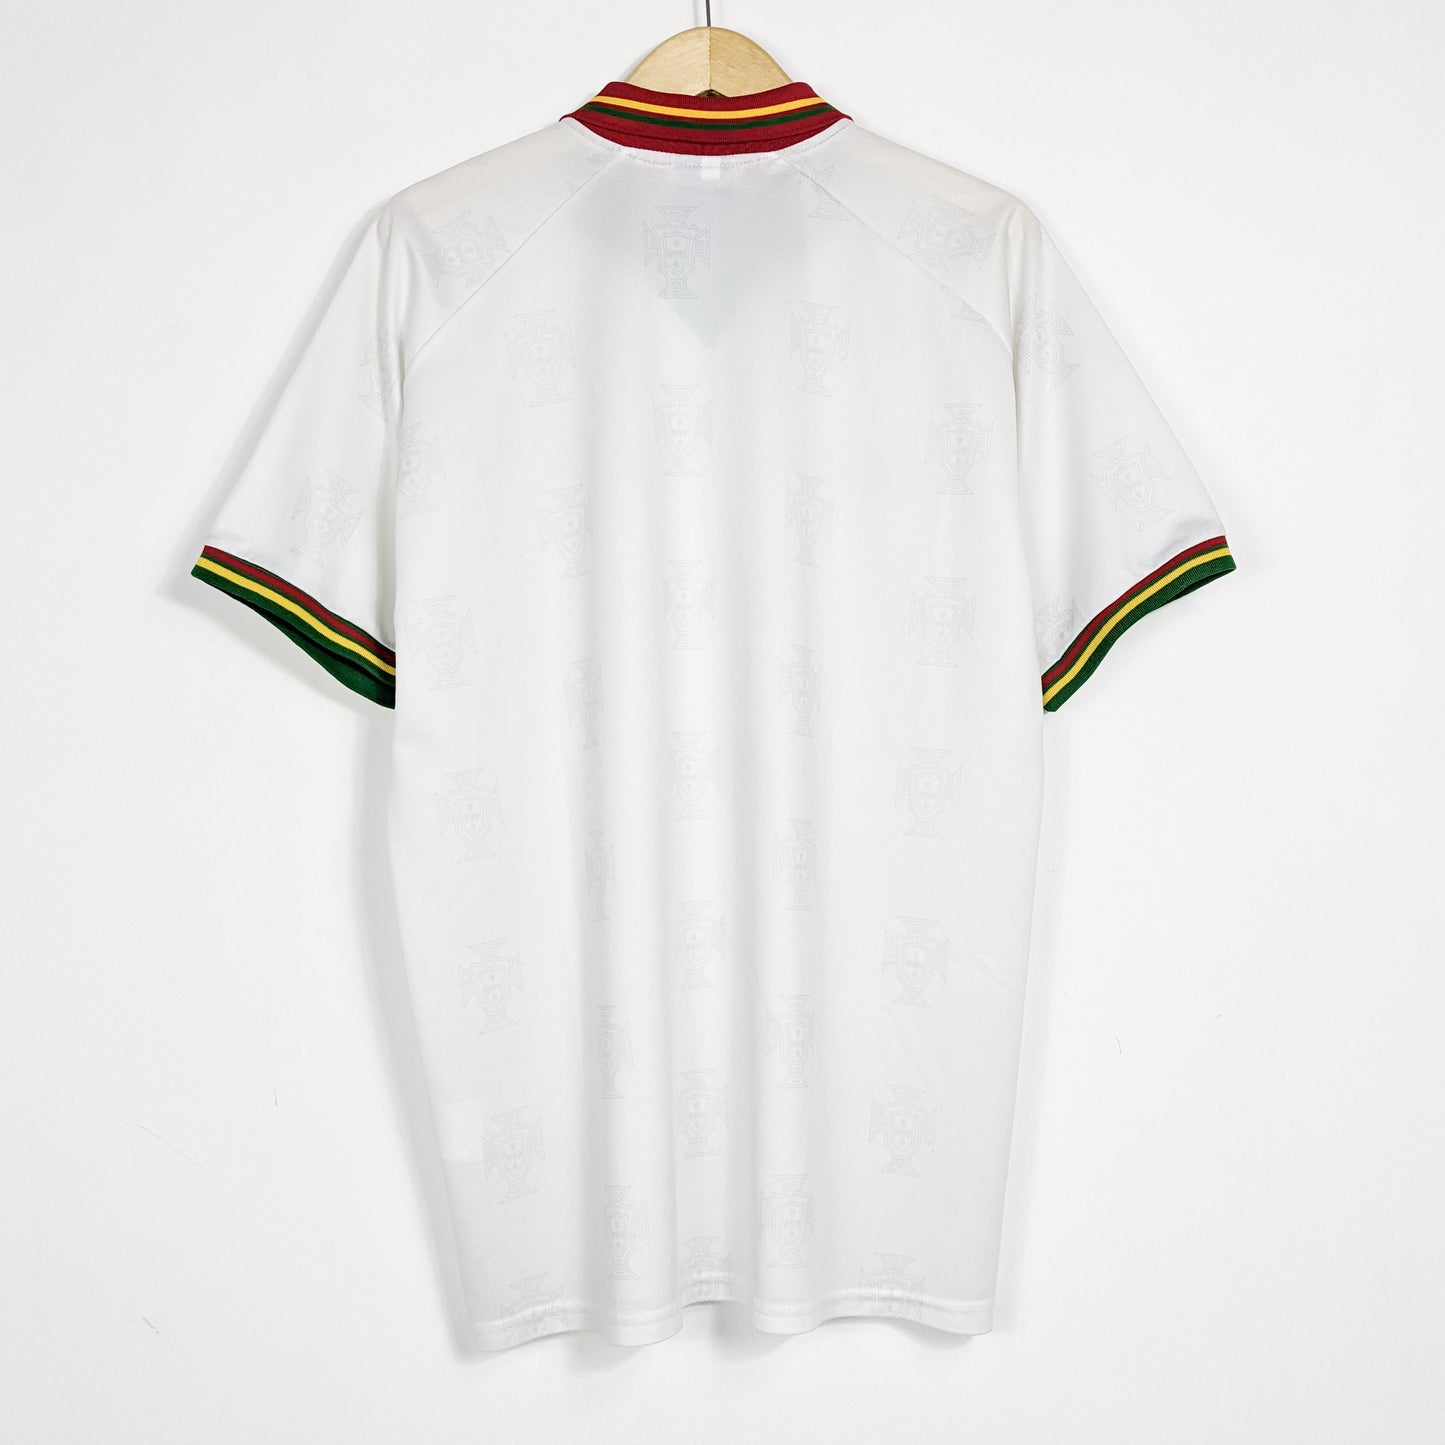 Authentic Portugal 1995/1996 Away - Size XL